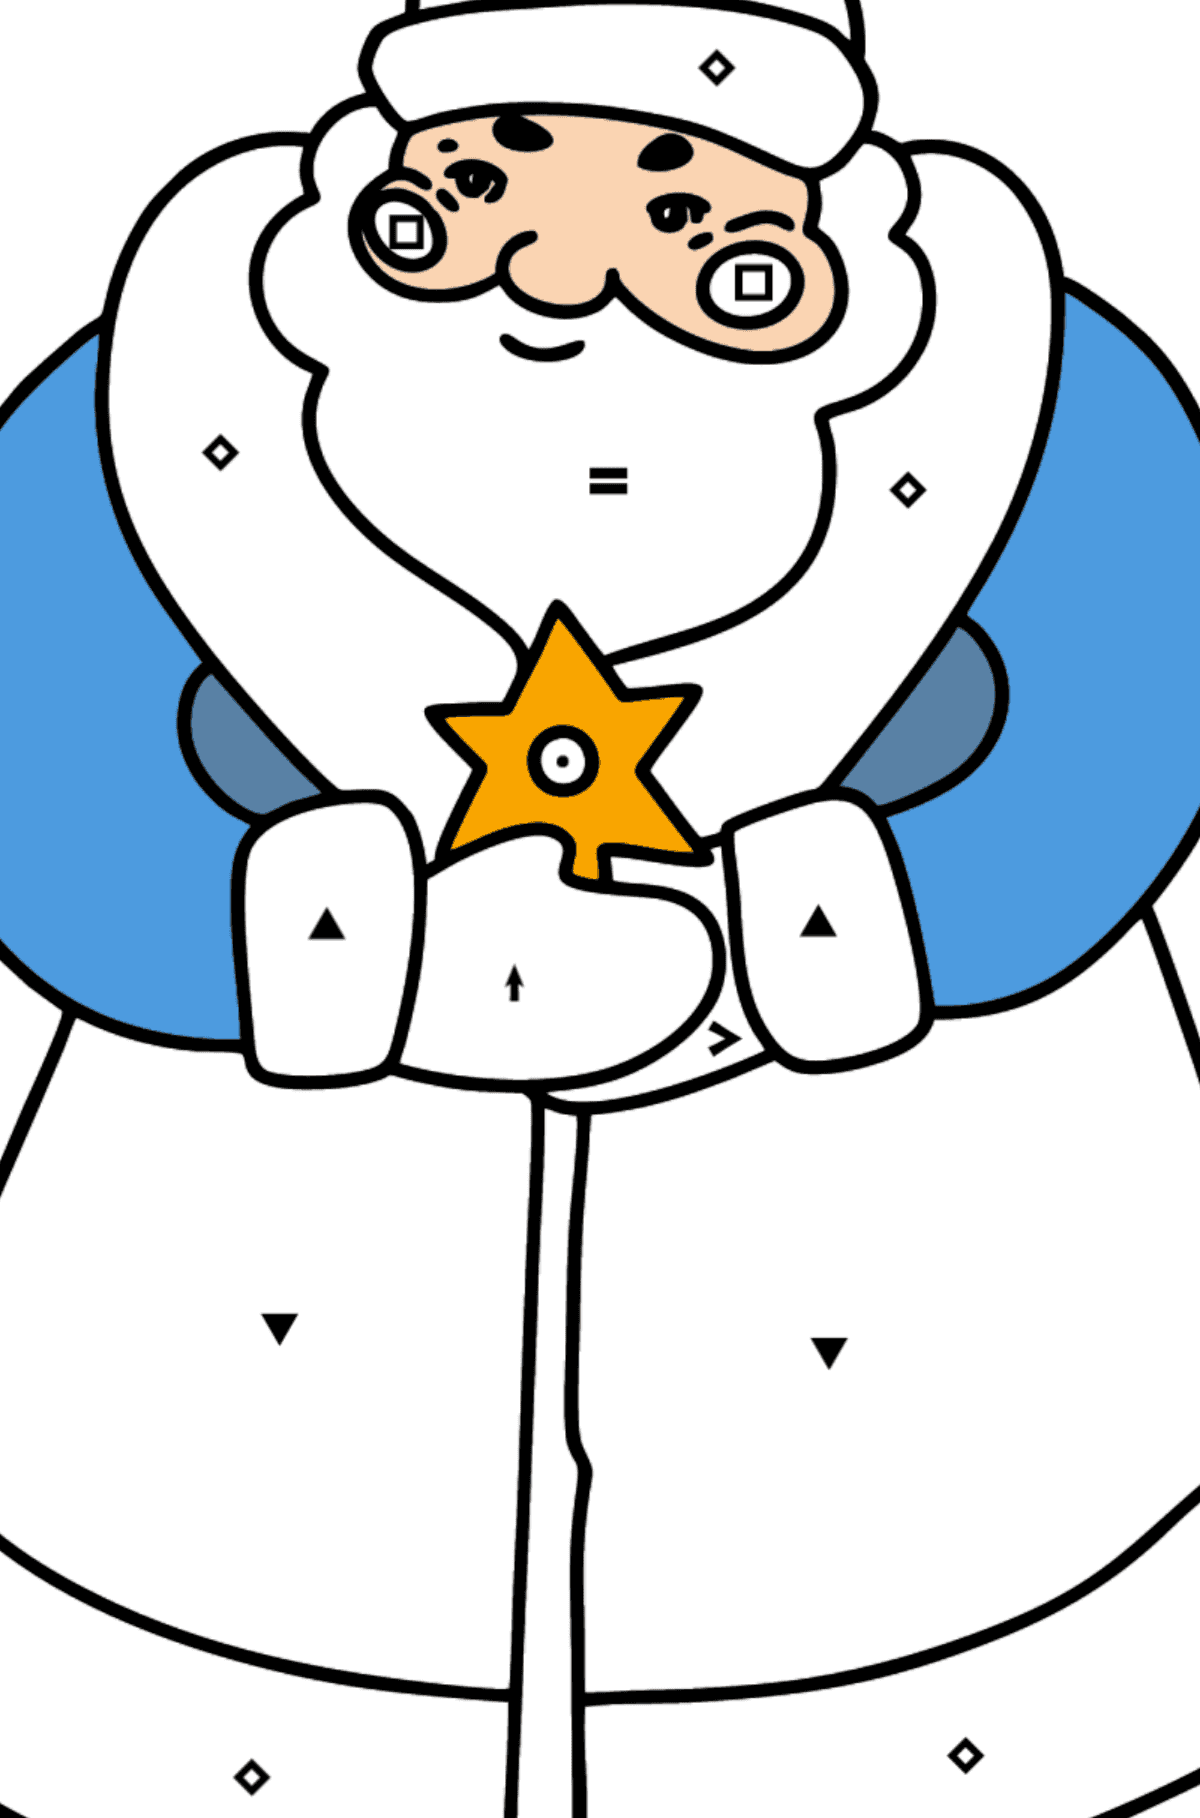 Good Father Frost coloring page - Coloring by Symbols for Kids